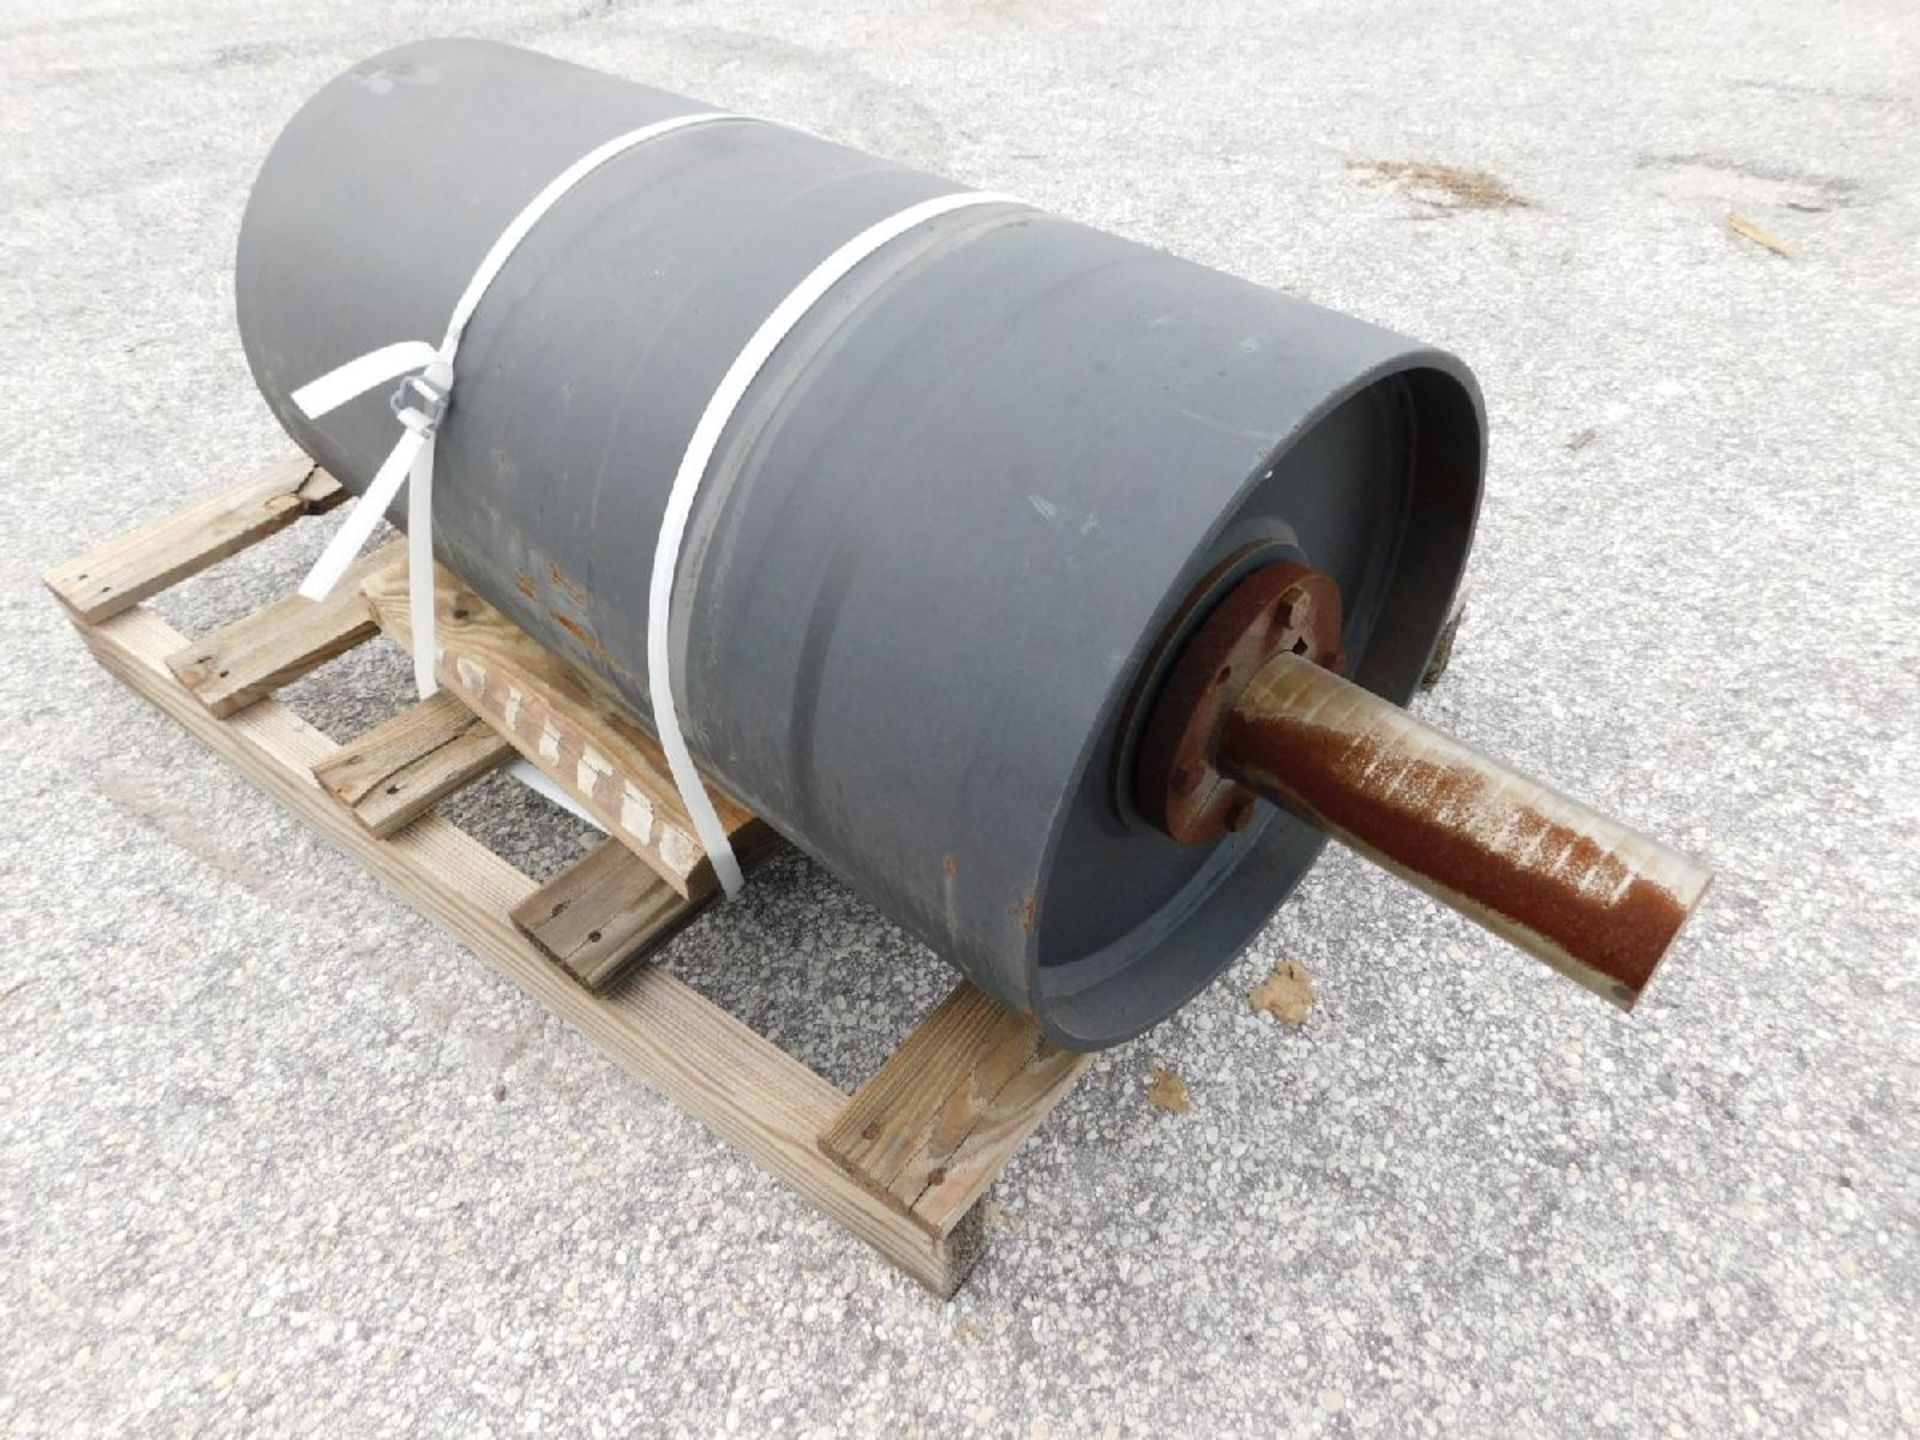 Conveyor Drum - 32"Wide x 16" Diameter, Without Lagging, CS. Asset# AAQ567L. Asset Located at 3200 - Image 2 of 2